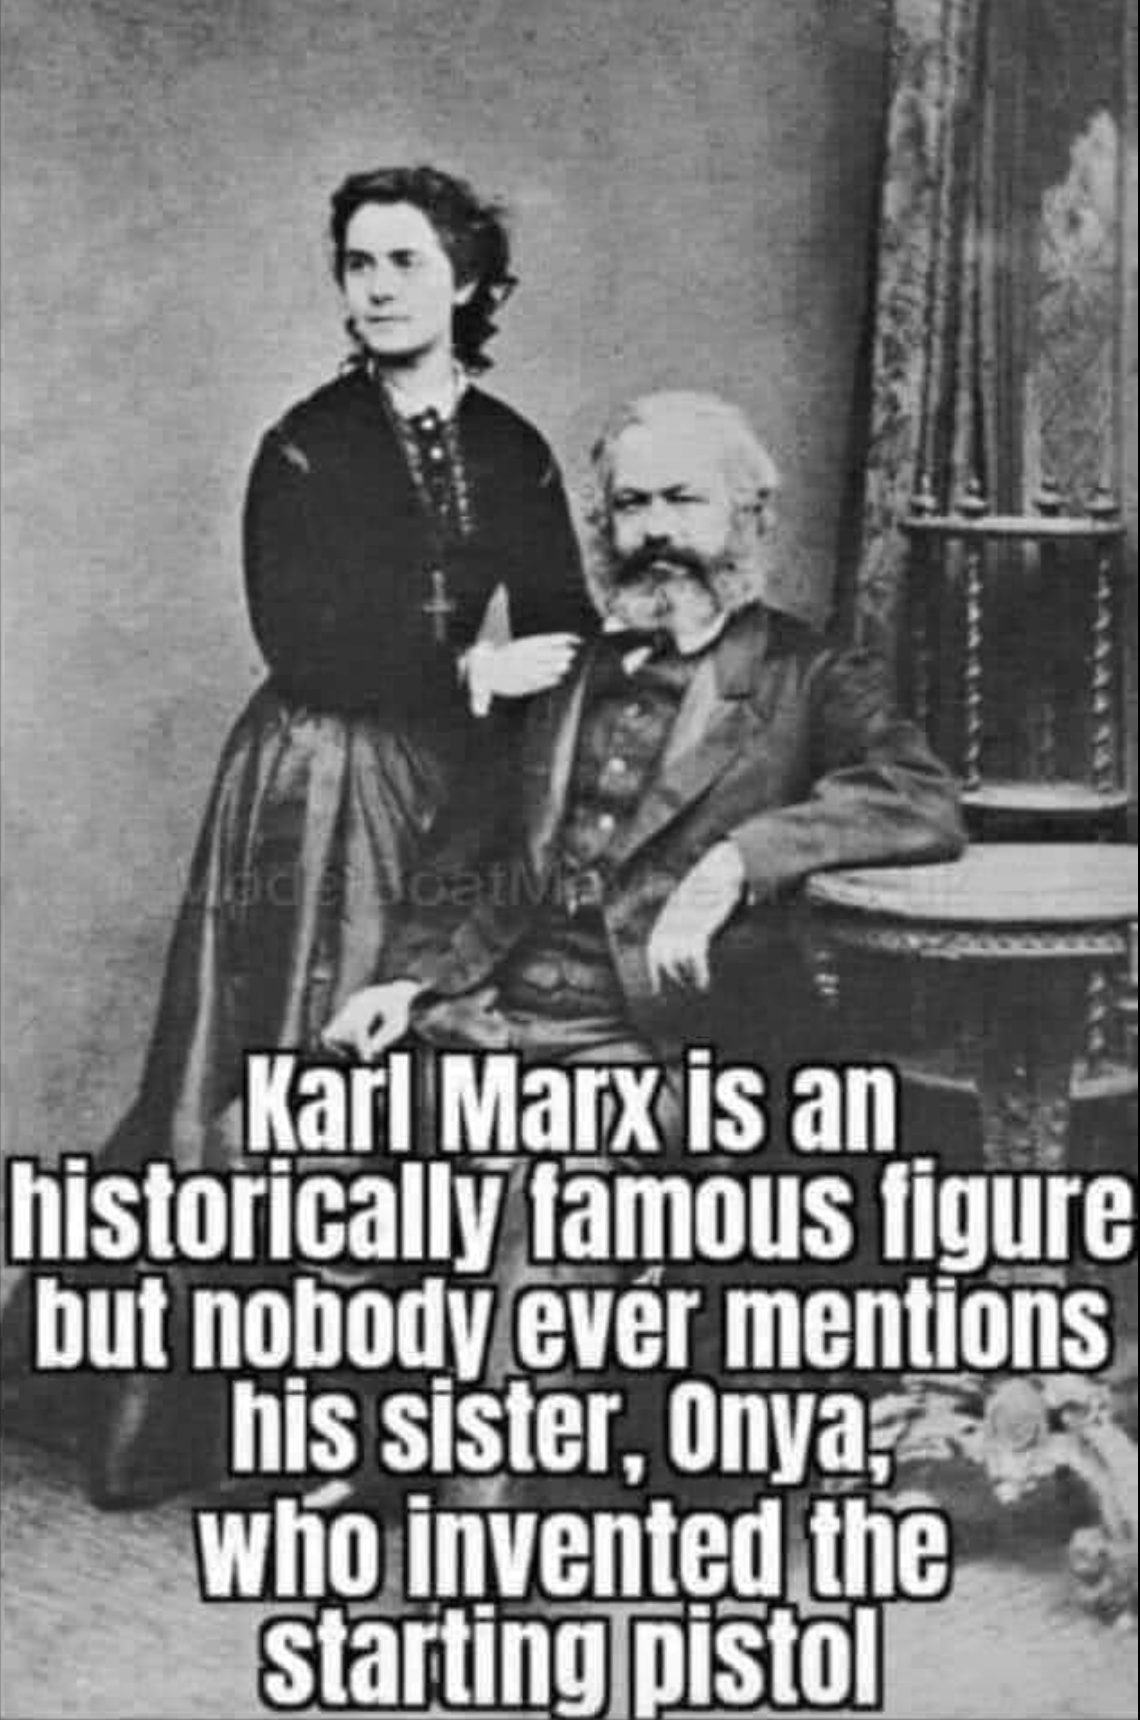 karl marx real - Vala Karl Marx is an historically famous figure but nobody ever mentions his sister, Onya, who invented the starting pistol